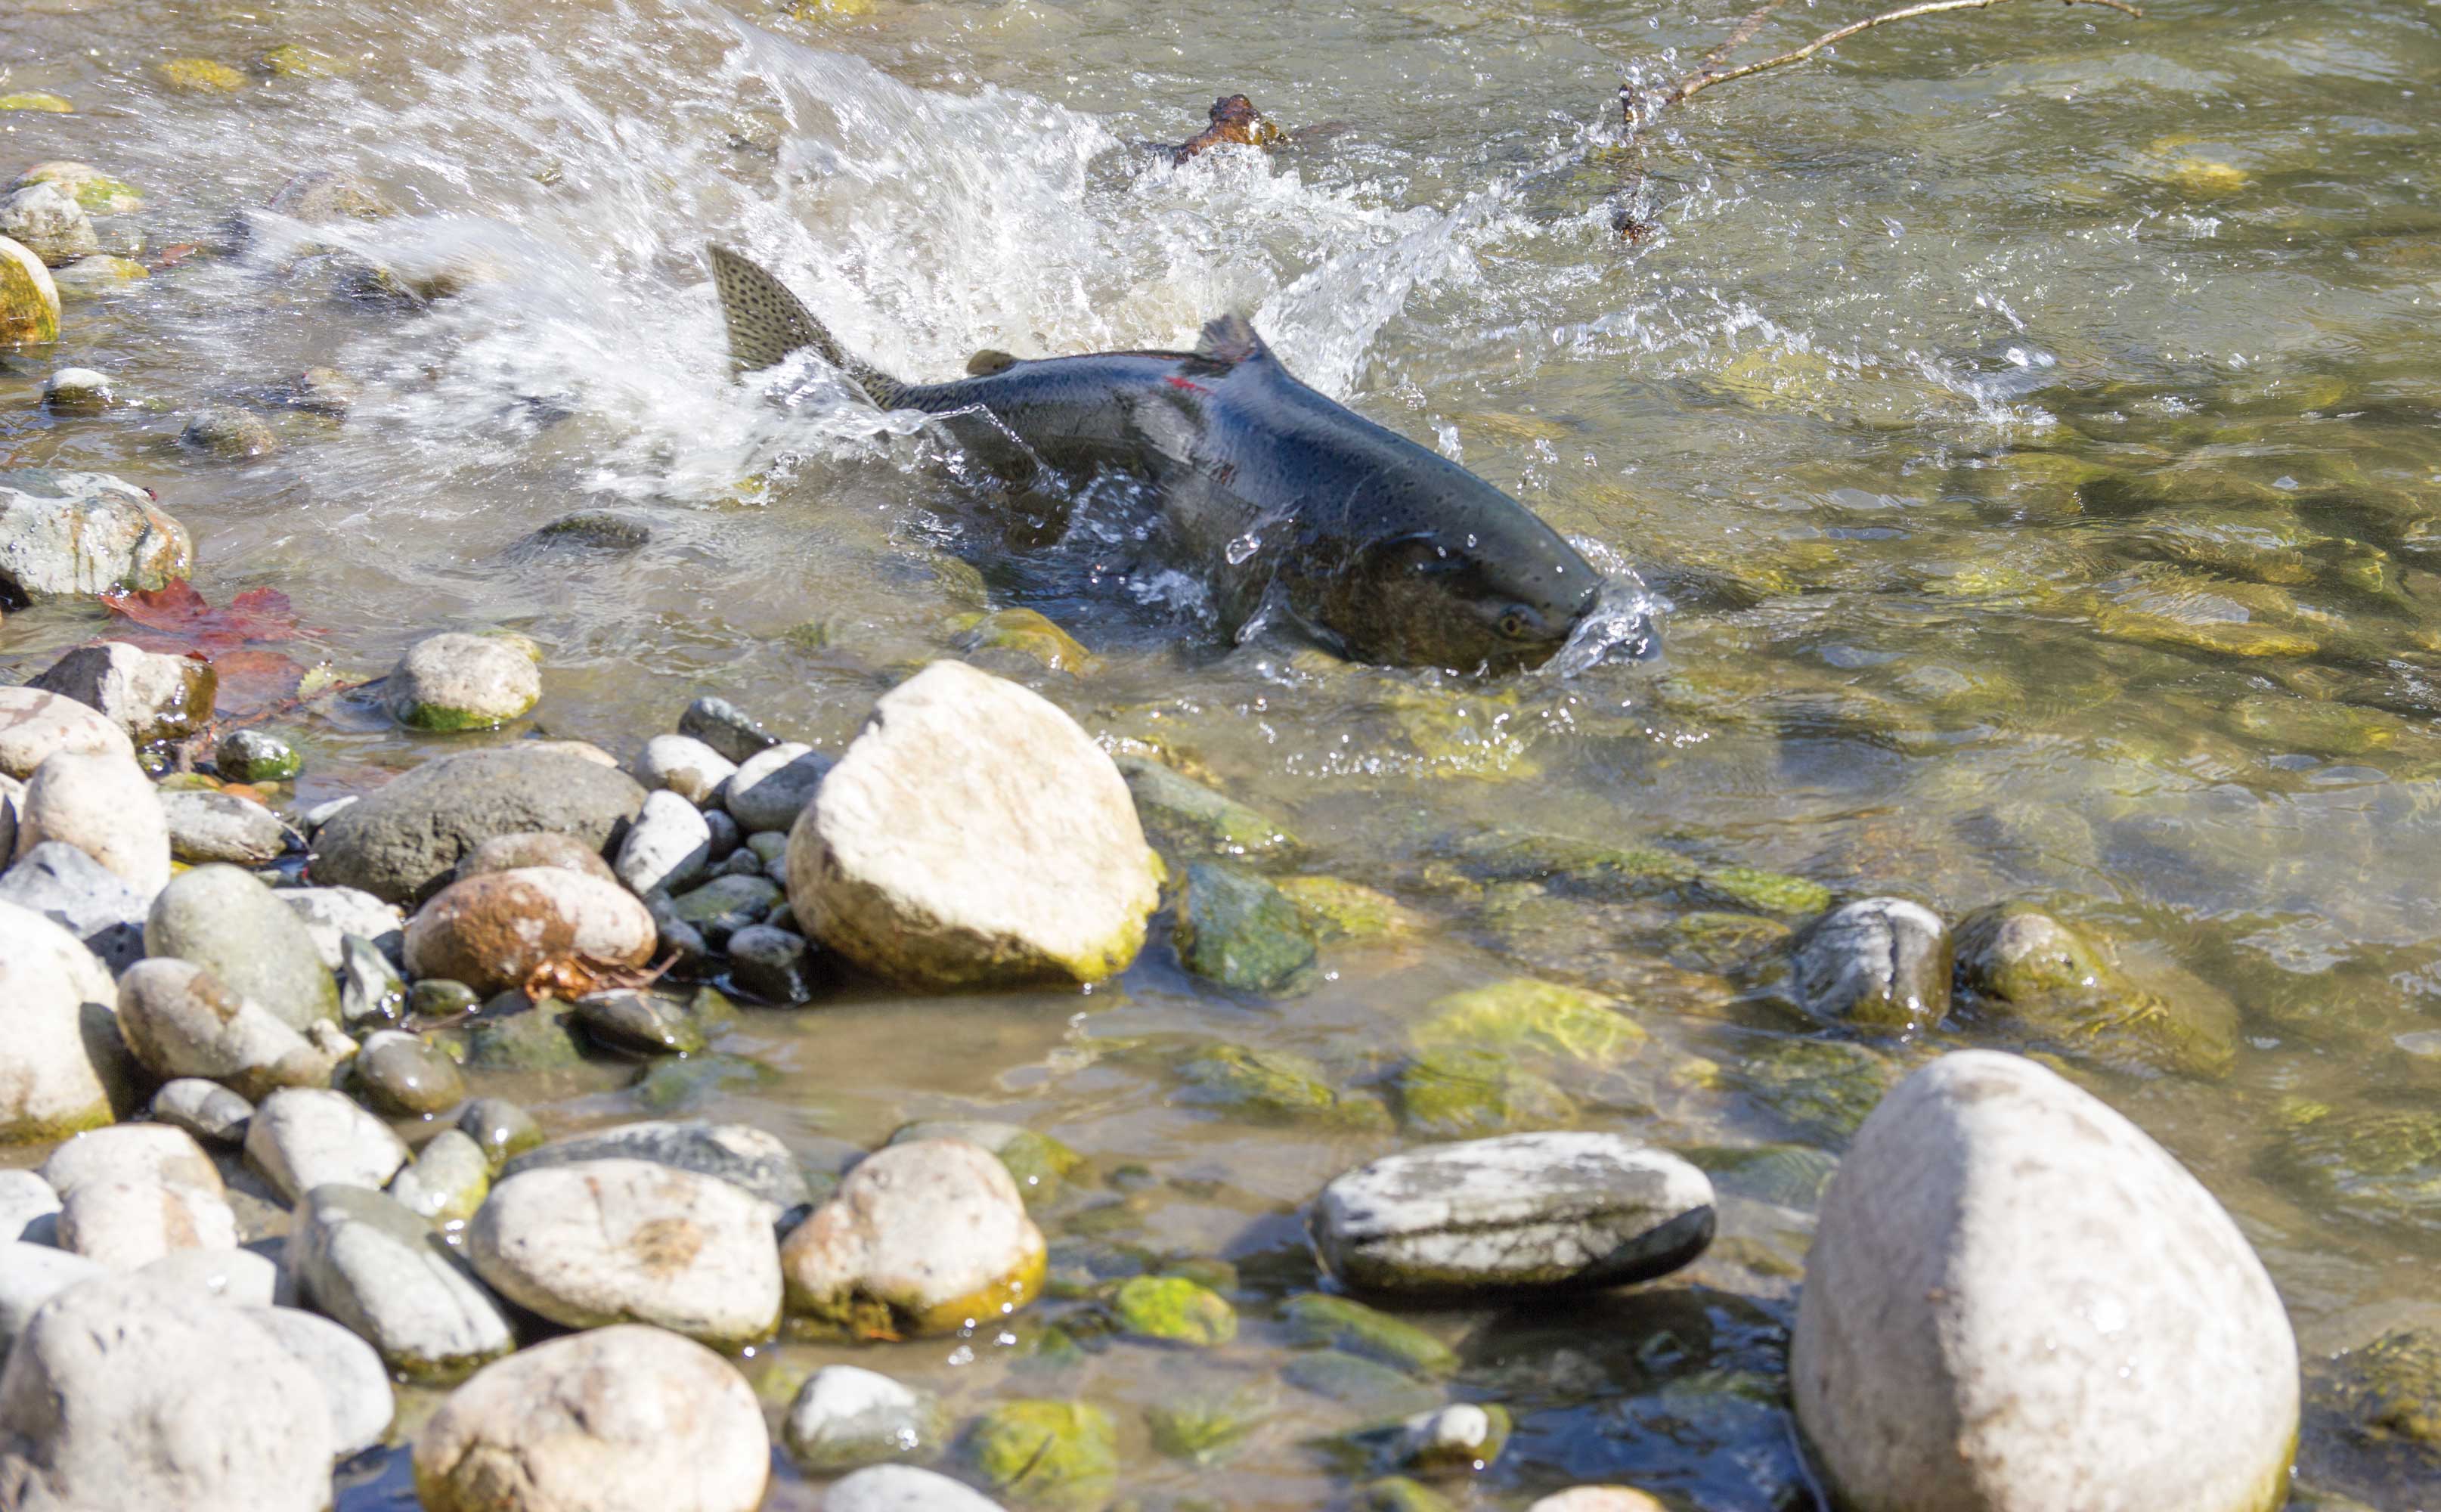 Being Frank: We’re Finding Common Ground To Save Salmon